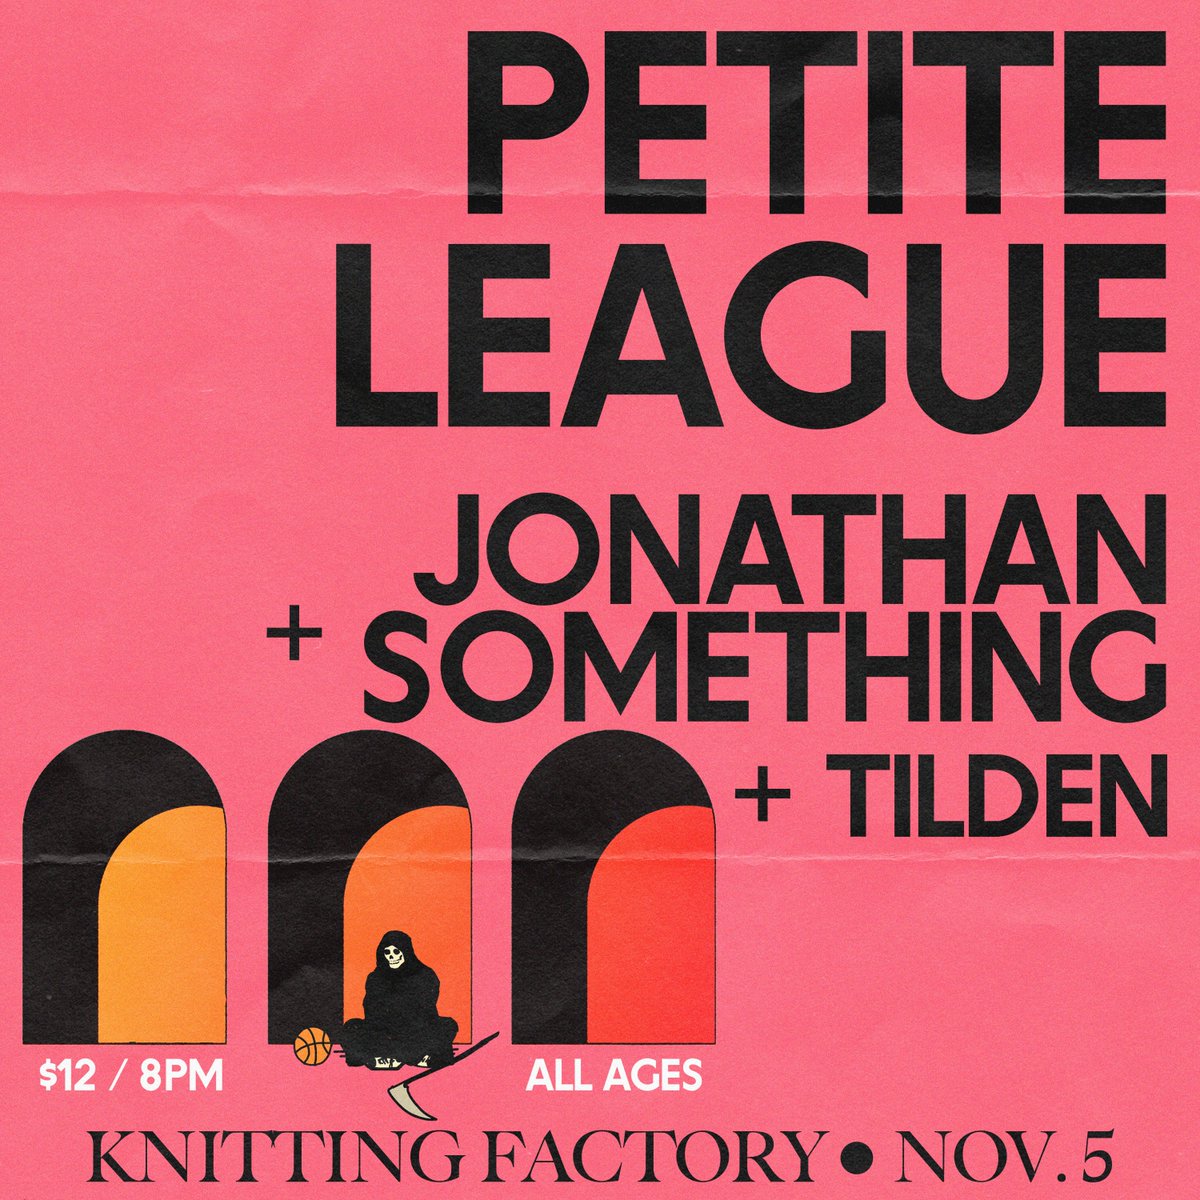 Woah! We're doing a headline show at @KnitFactoryBK with @j_smthng and our practice space friends Tilden November 5th! It's going to be our last show of the year in New York! GET TICKETS TODAY, BABY! bit.ly/pttlgkfbk